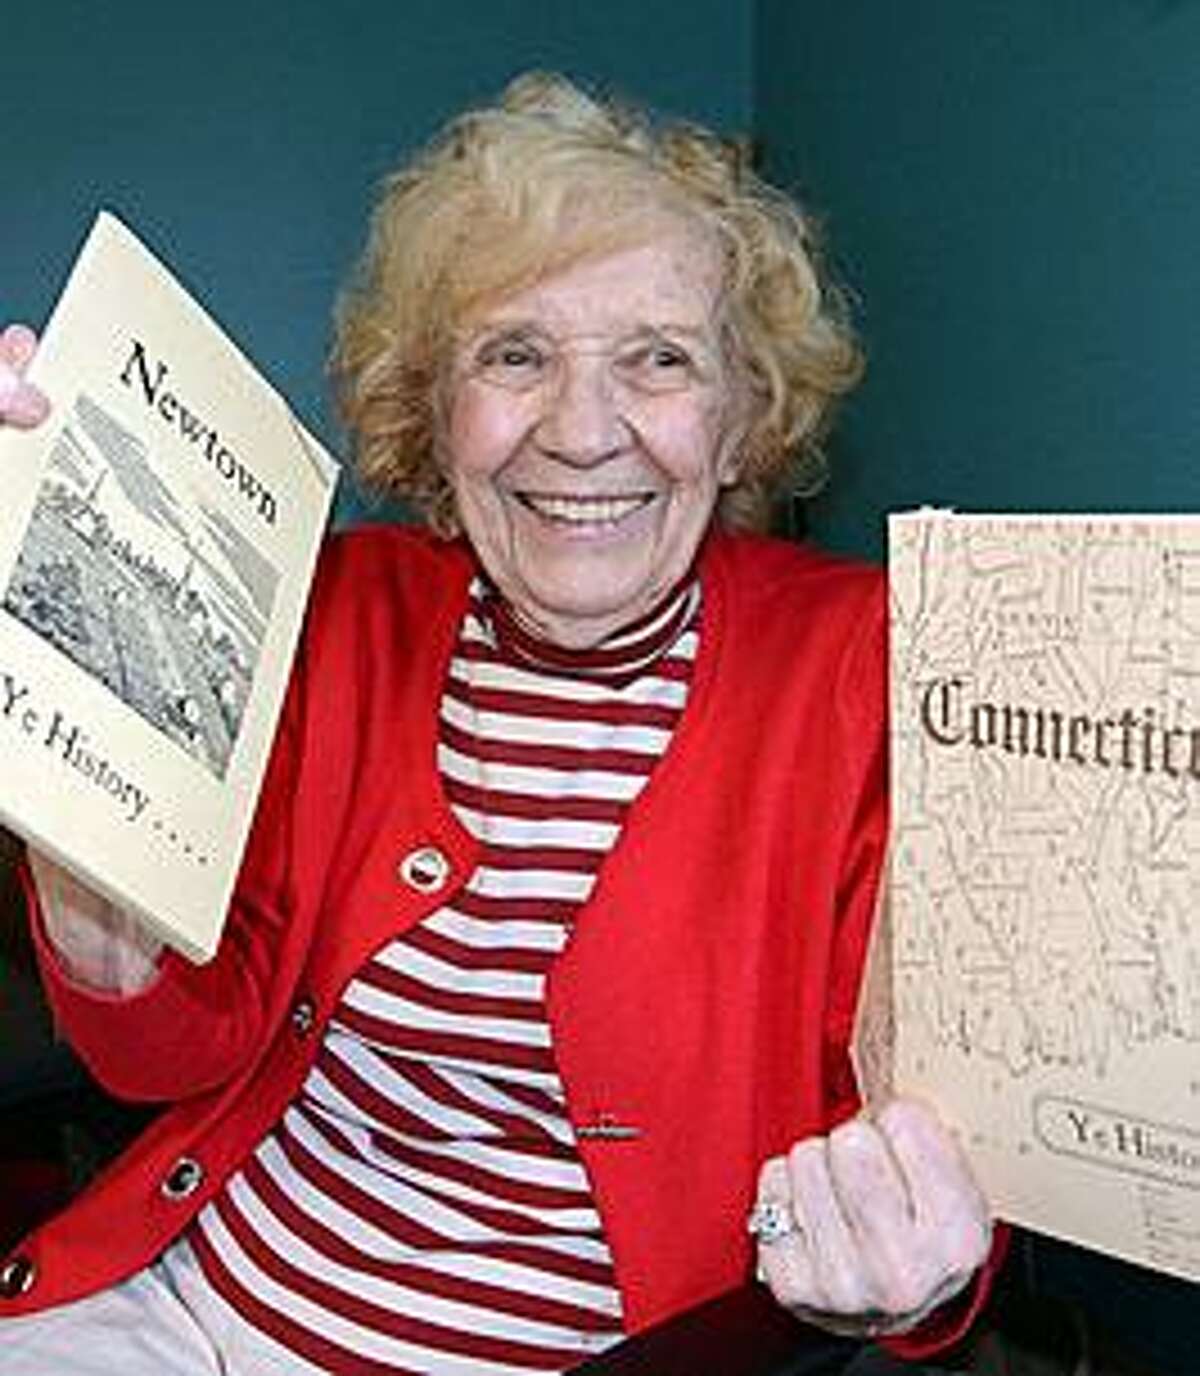 Mae Schmidle, who many called the “spirit of Newtown,” died on Friday, April 26, 2019 at age 92. Along with serving four terms as a state reprsentative, Schmidle was a Newtown’s town clerk and president of the Connecticut State PTA. During her years in the Lesgilature she will be remembered for her advocacy on behalf of the historic flagpole, first erected in 1876 the centennial celebration of the nation’s independence.